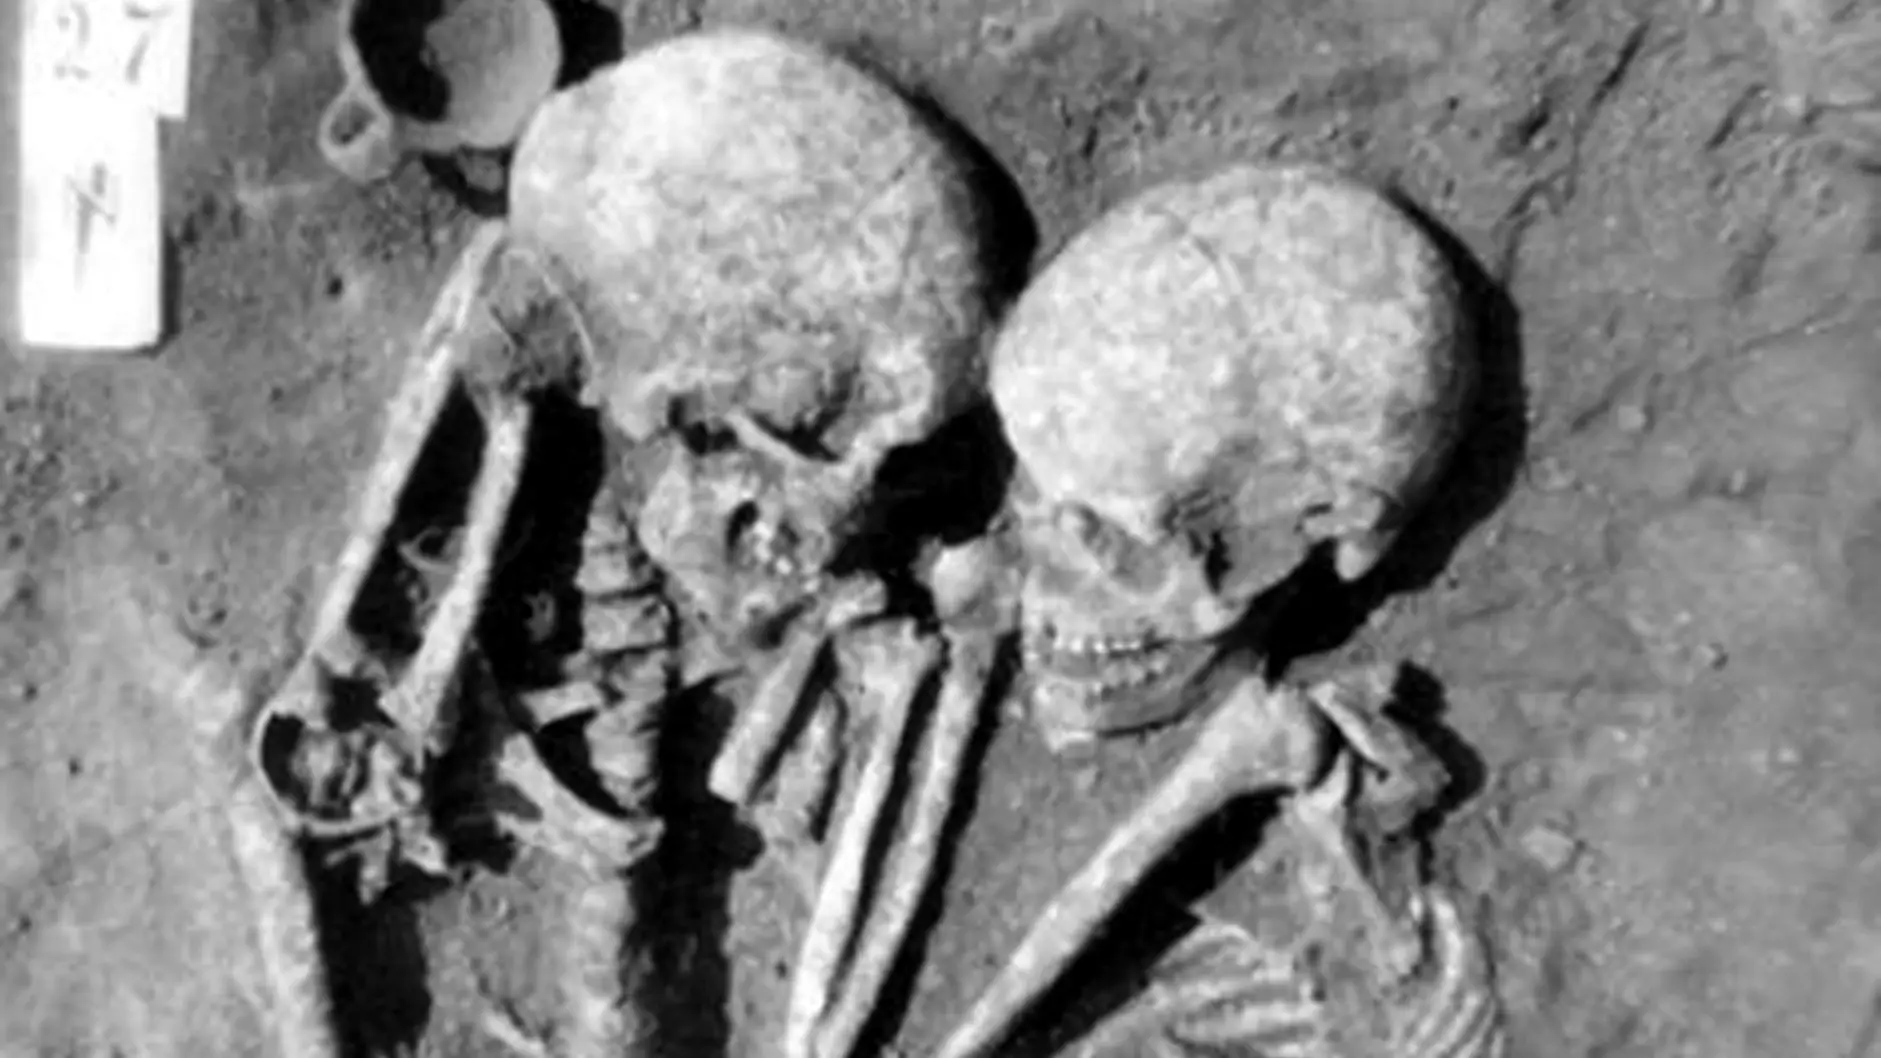 3,000-Year-Old Skeletons Found Hugging One Another In Grave